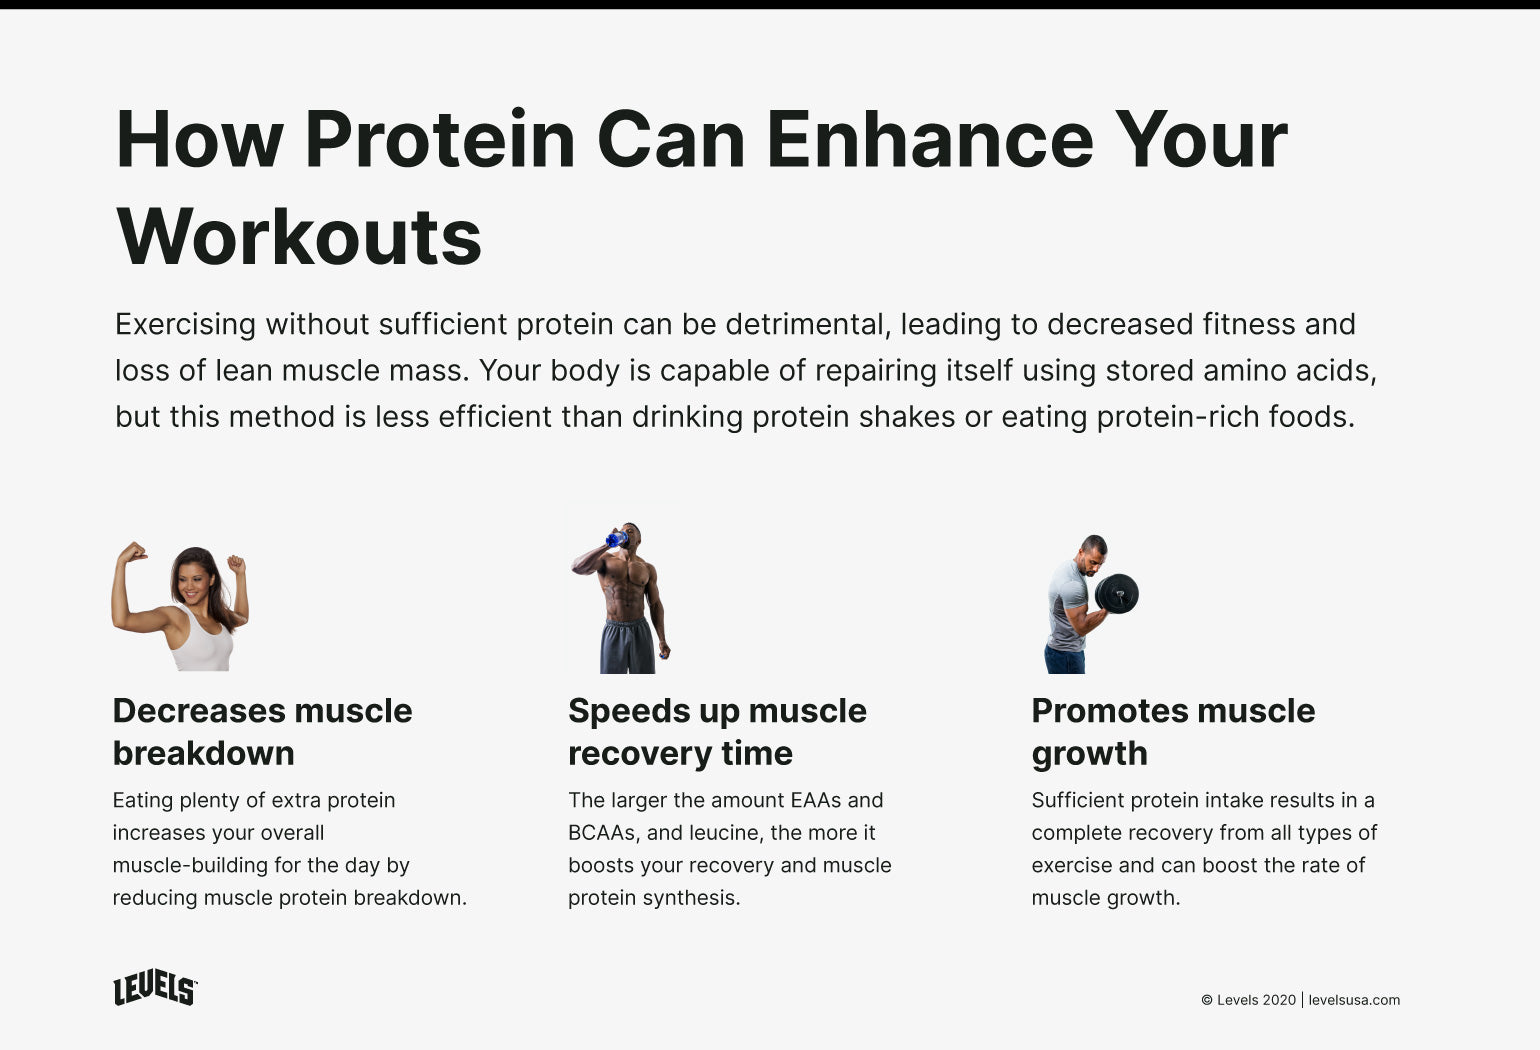 Benefits of Protein For Workouts - Infographic